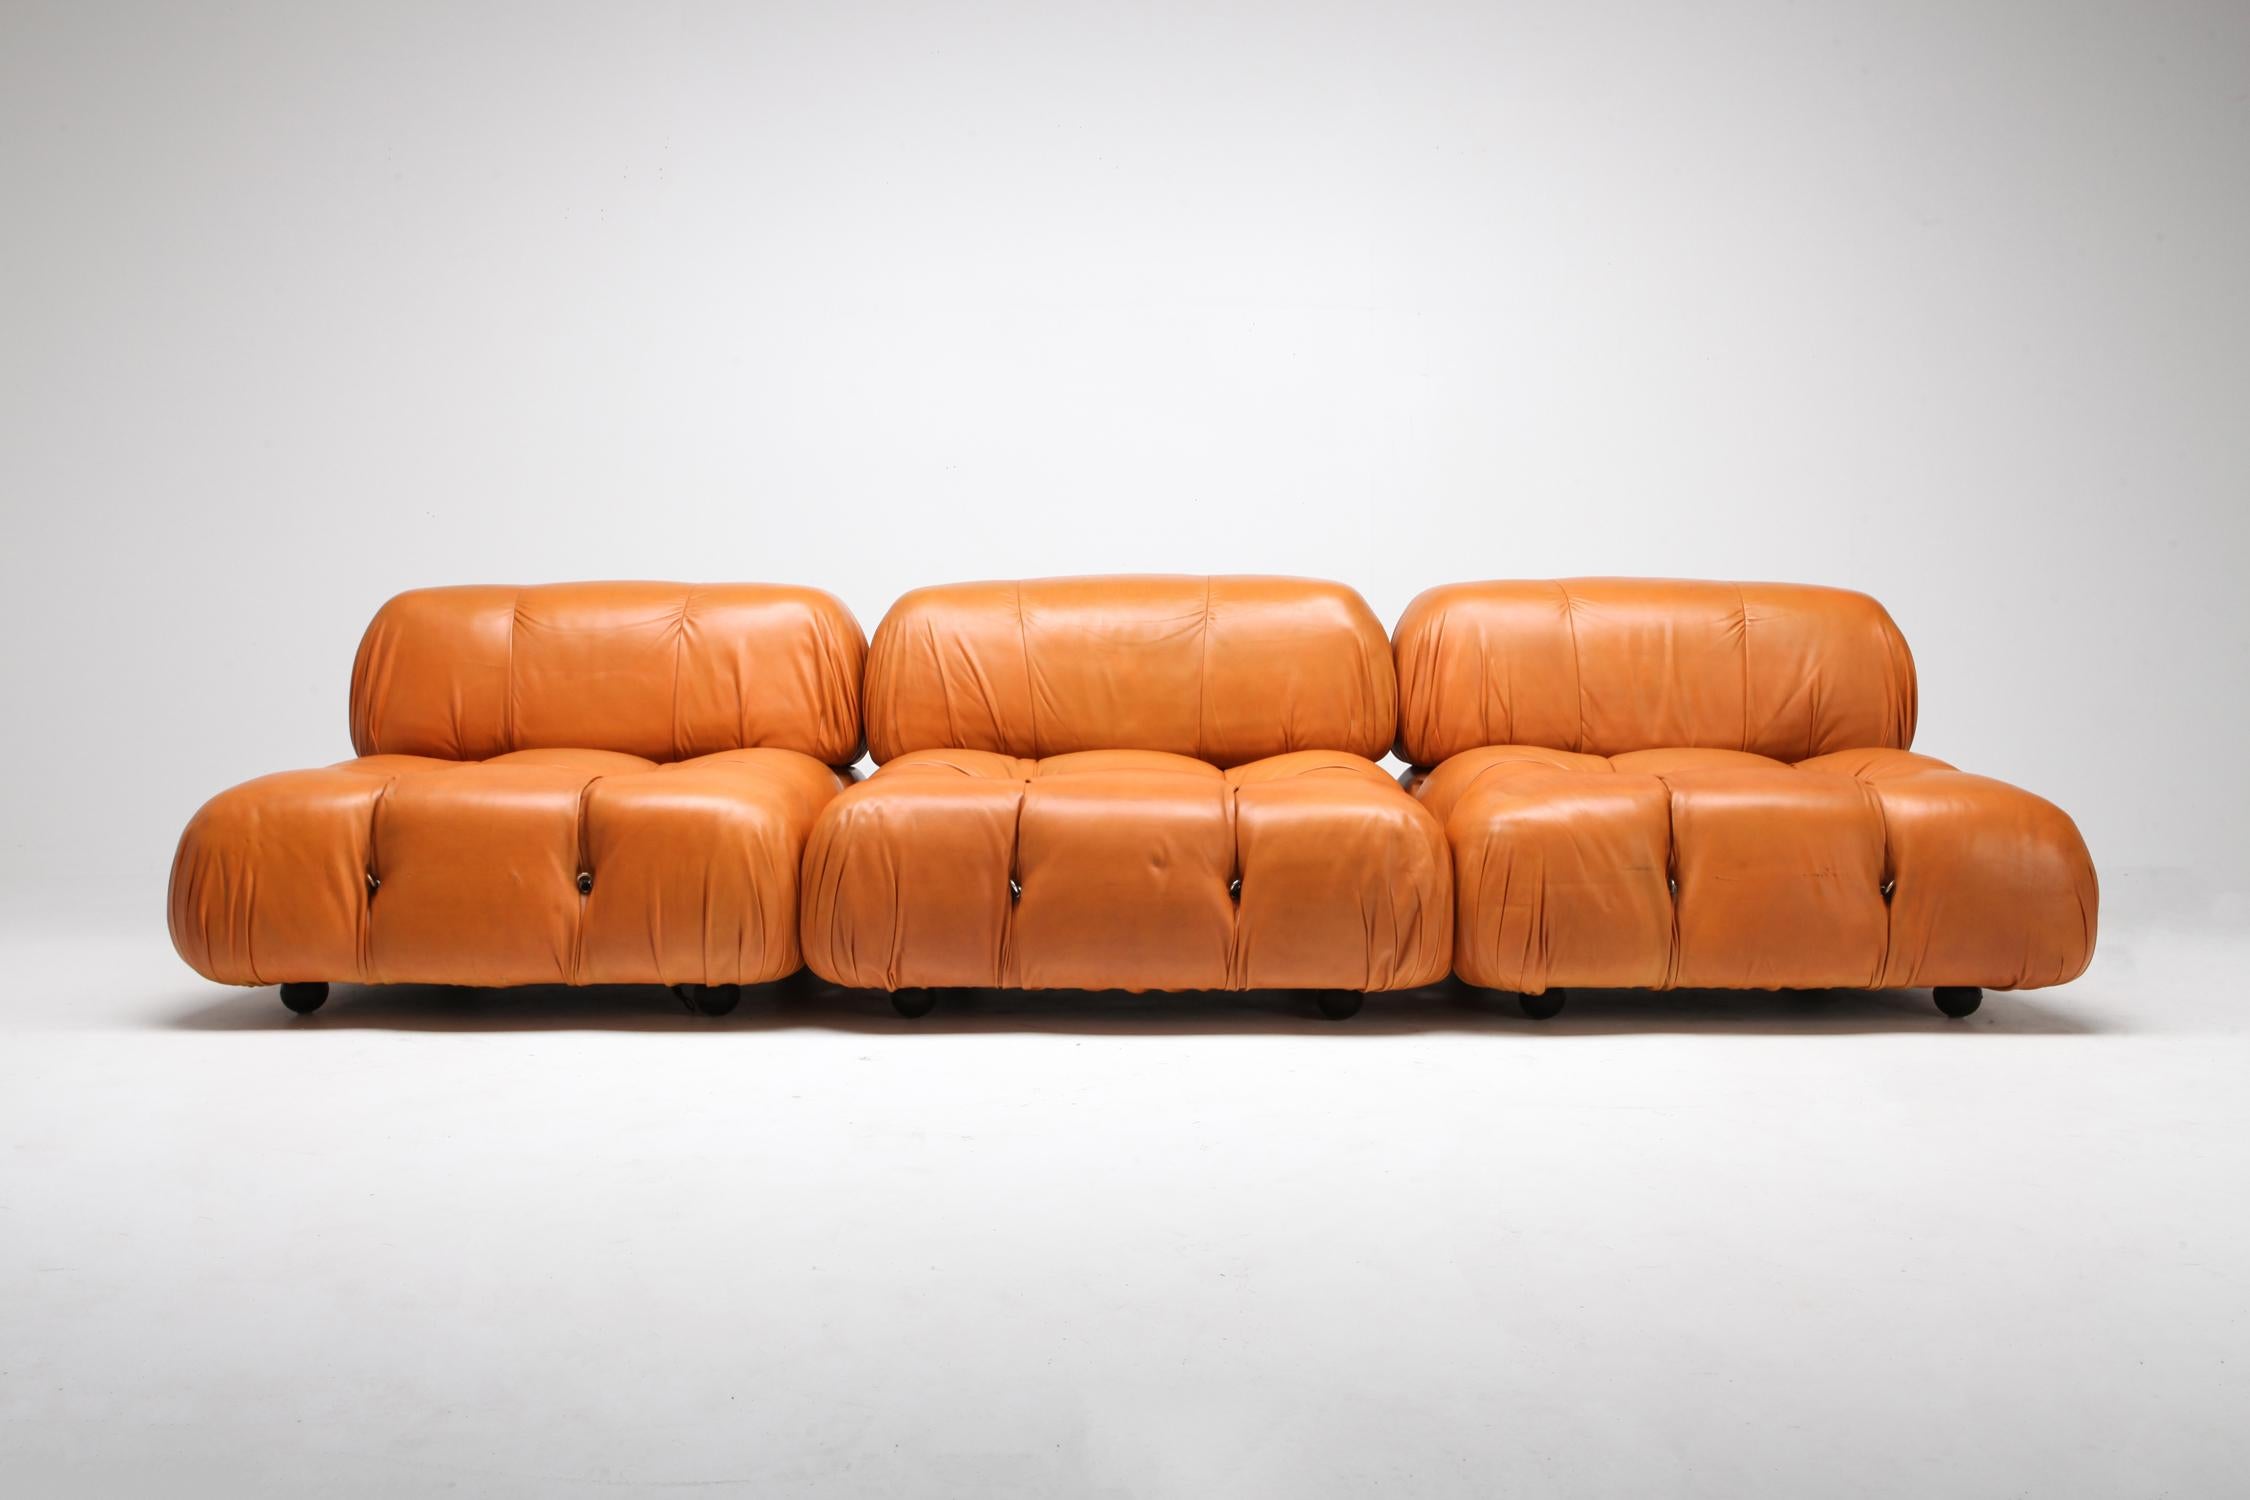 Mario Bellini's Camaleonda couch for C&B Italia, 1970s

The pinnacle of Postmodern design 
The most beautiful edition of all Camaleonda pieces is of course the one in original cognac leather.




 